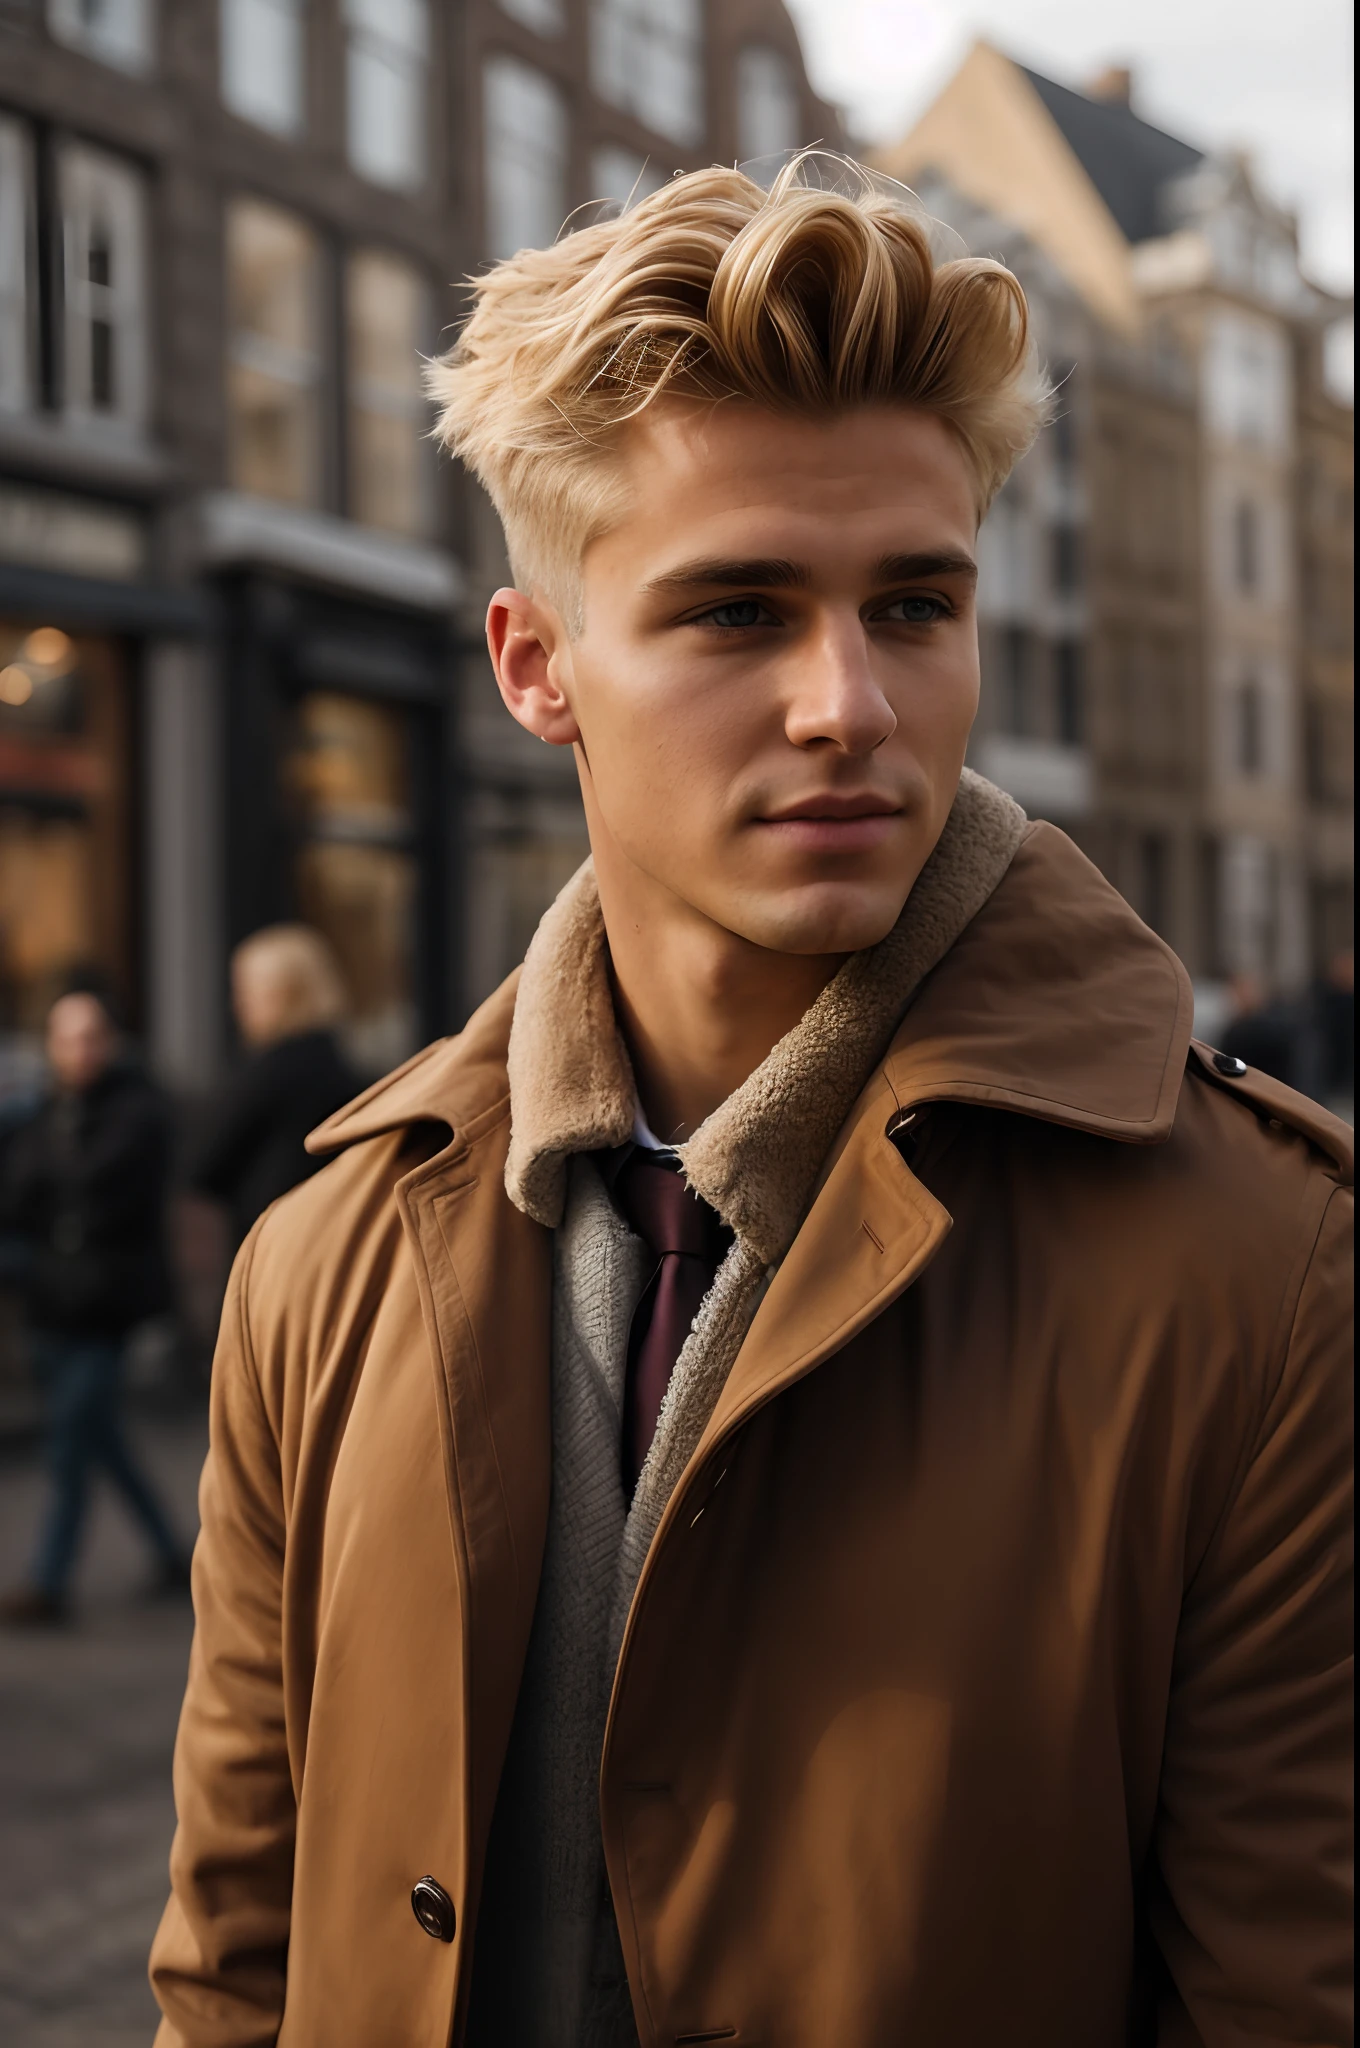 arafed man in a brown coat and tie standing in a city, blonde guy, beautiful young man, blonde man, lean man with light tan skin, light brown coat, in the style jordan grimmer, attractive man, blonde british man, attractive male, blond boy, cute young man, attractive young man, light brown trenchcoat, handsome male look straight into the camera